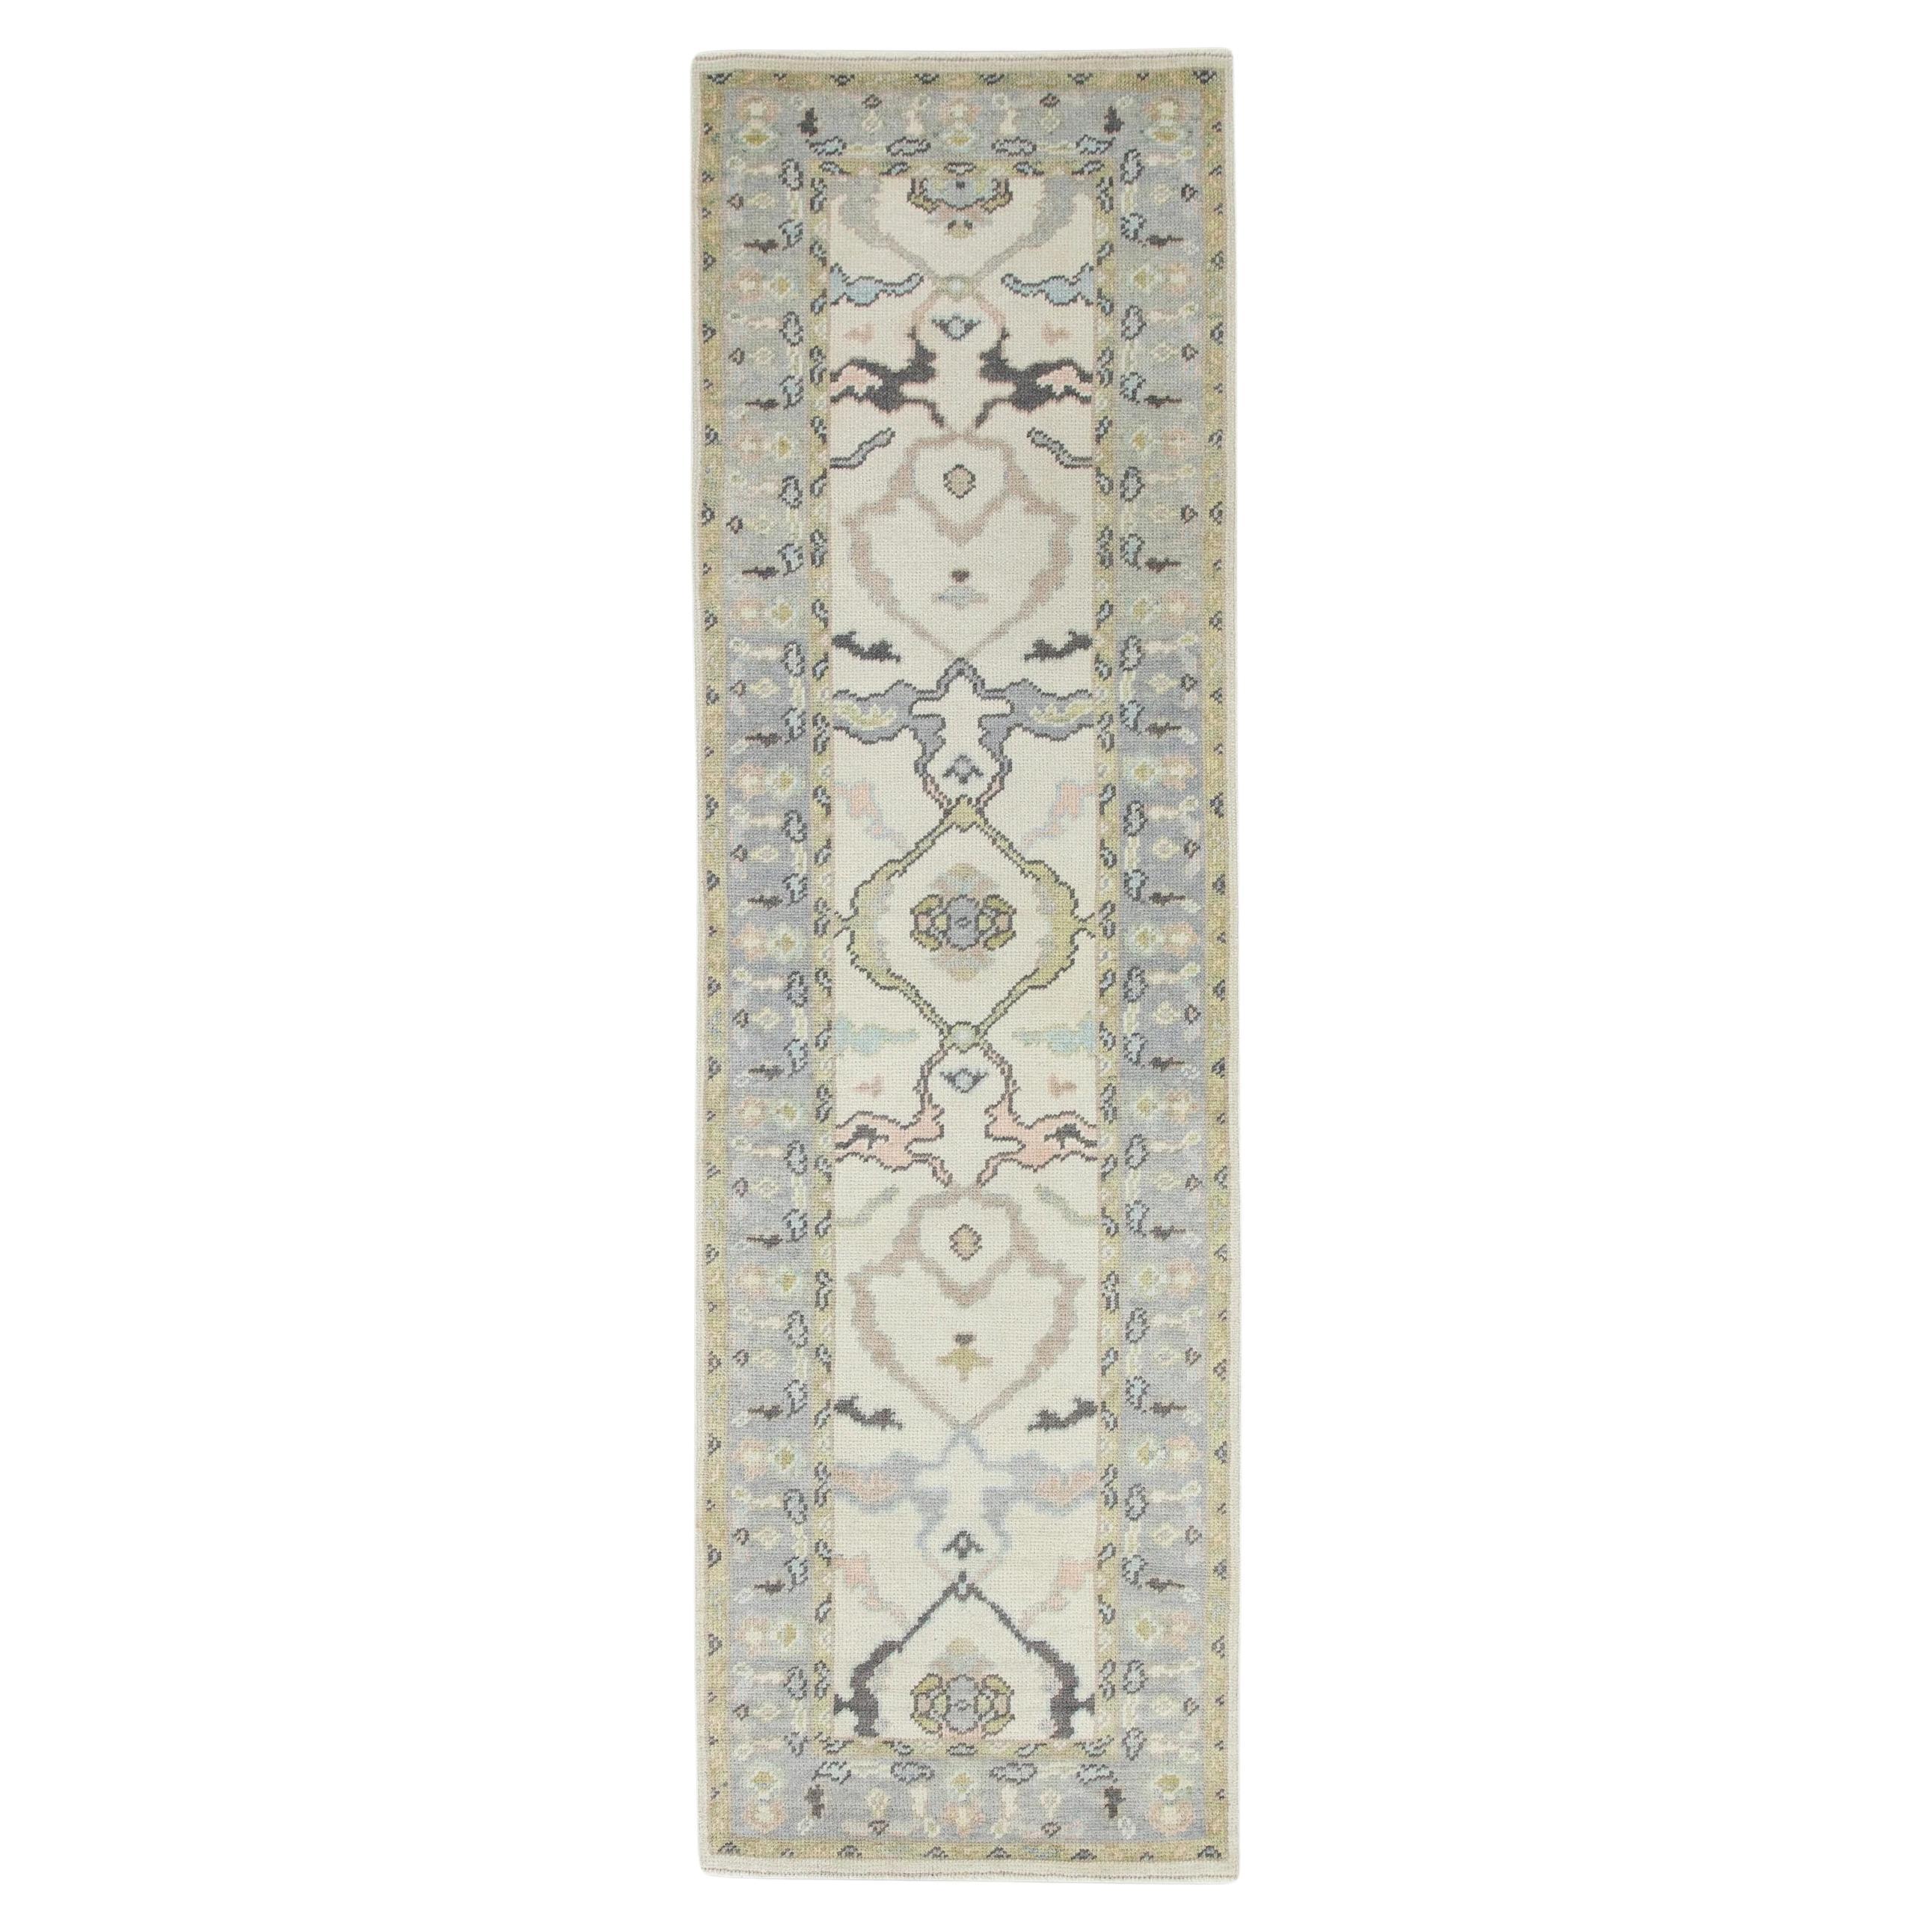 Floral Handwoven Wool Turkish Oushak Rug in Blue, Green, & Pink 2'7" x 8'9" For Sale